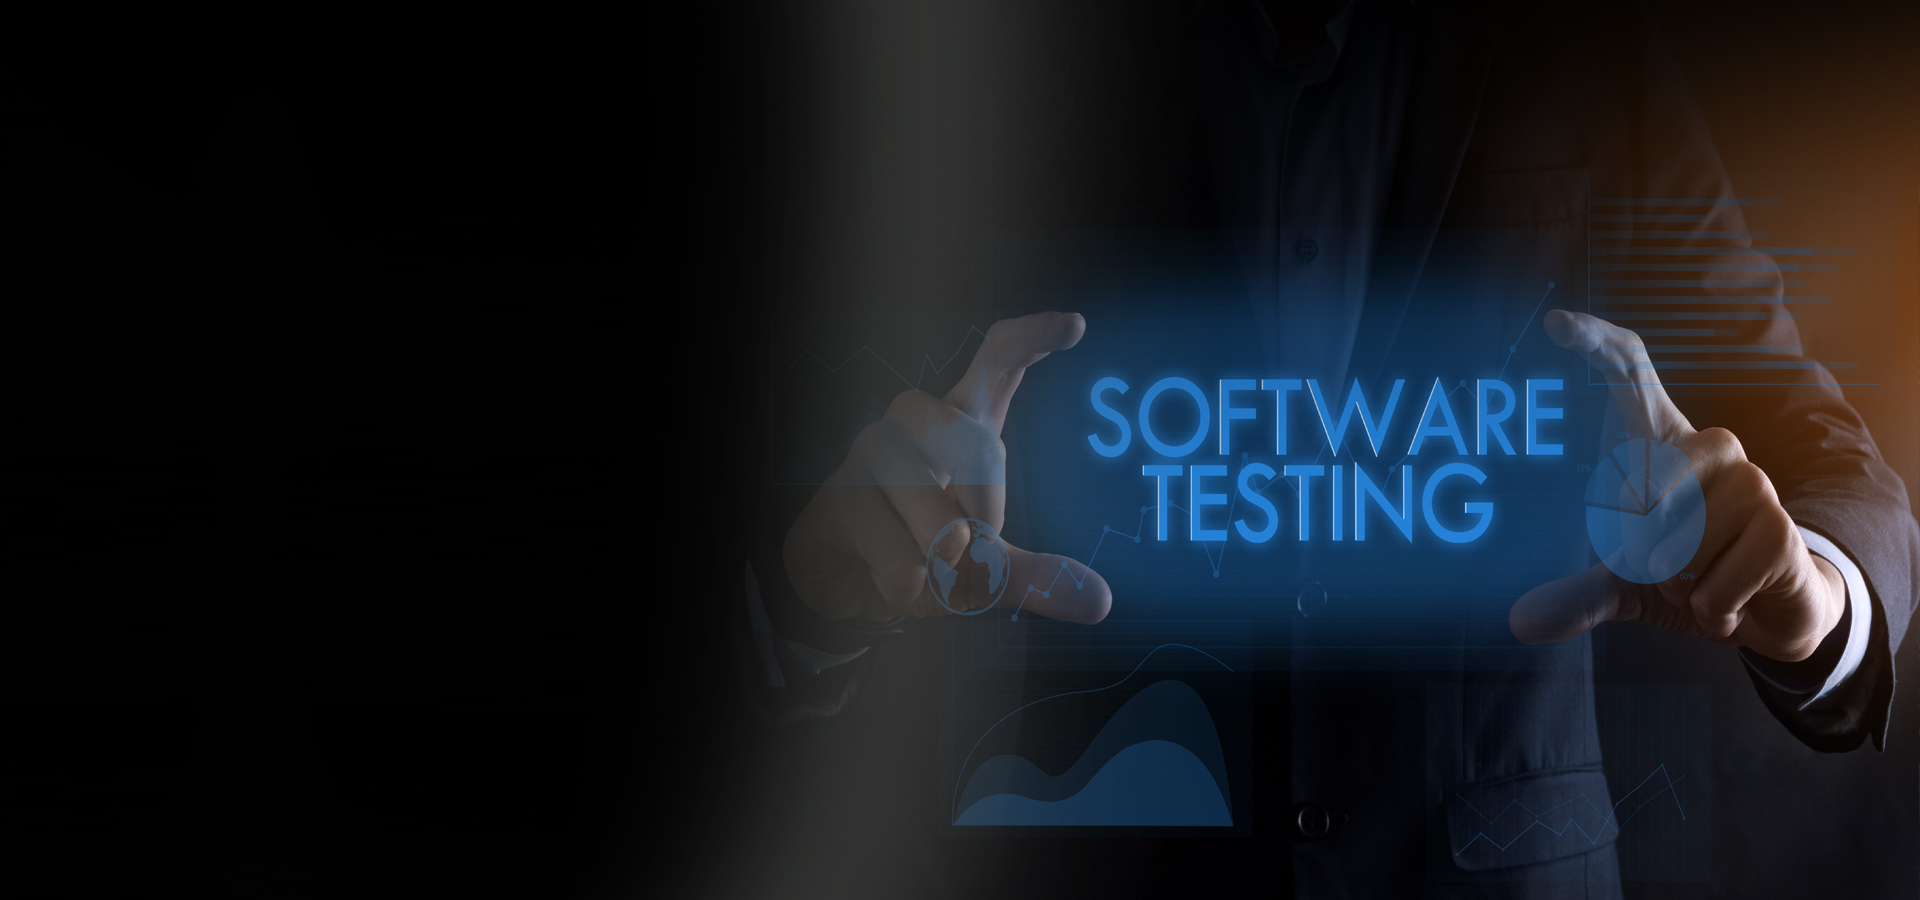 Additional Types of Testing Services


